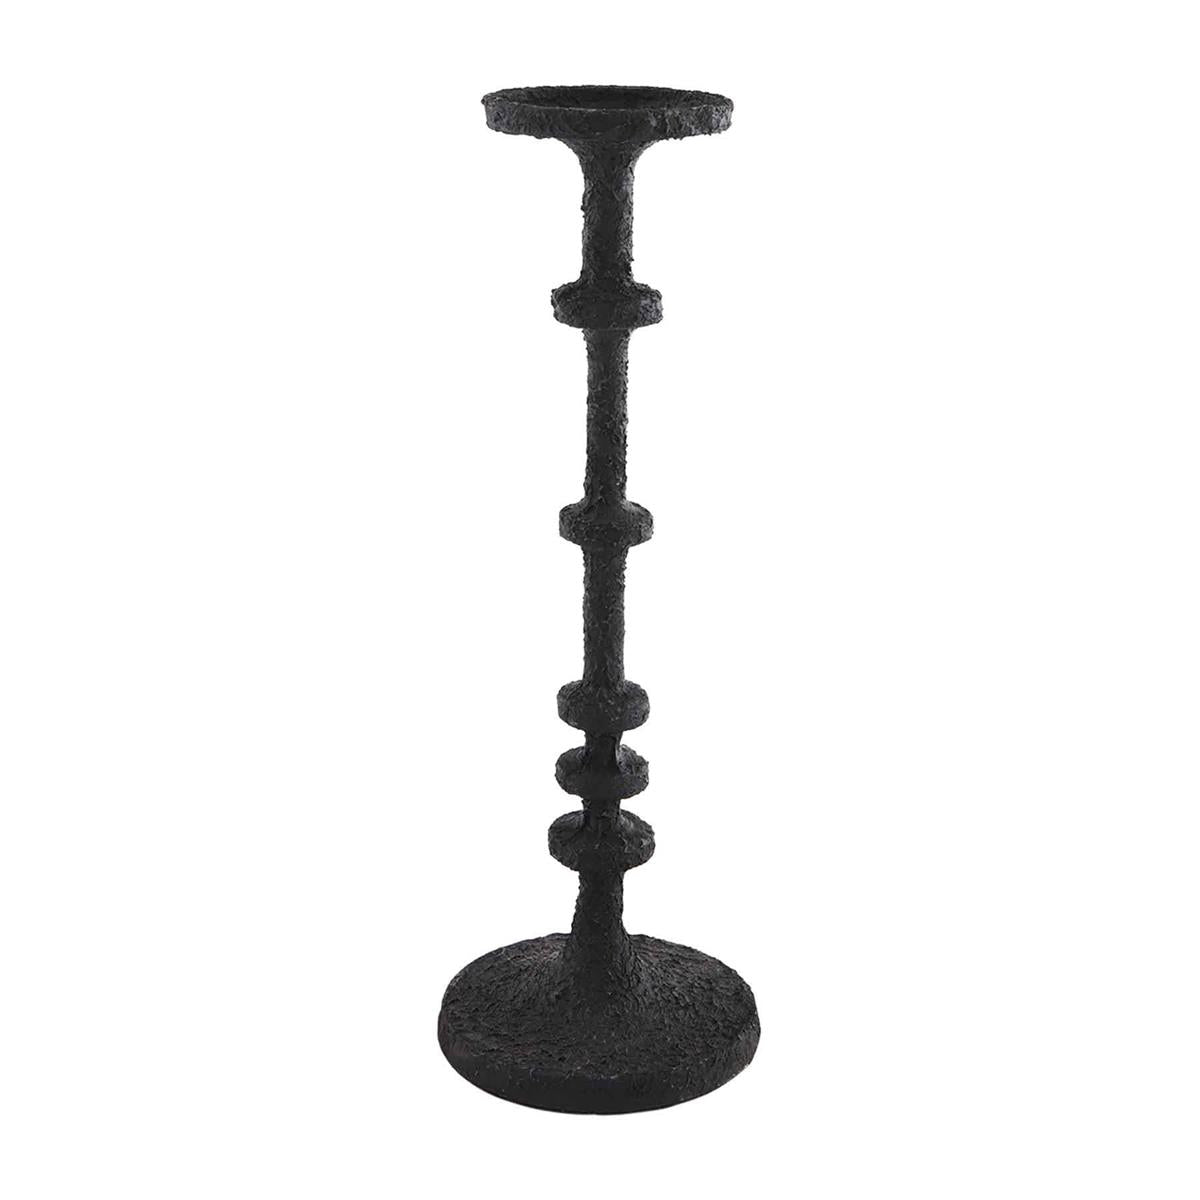 Small Black Metal Candlestick by Mud Pie